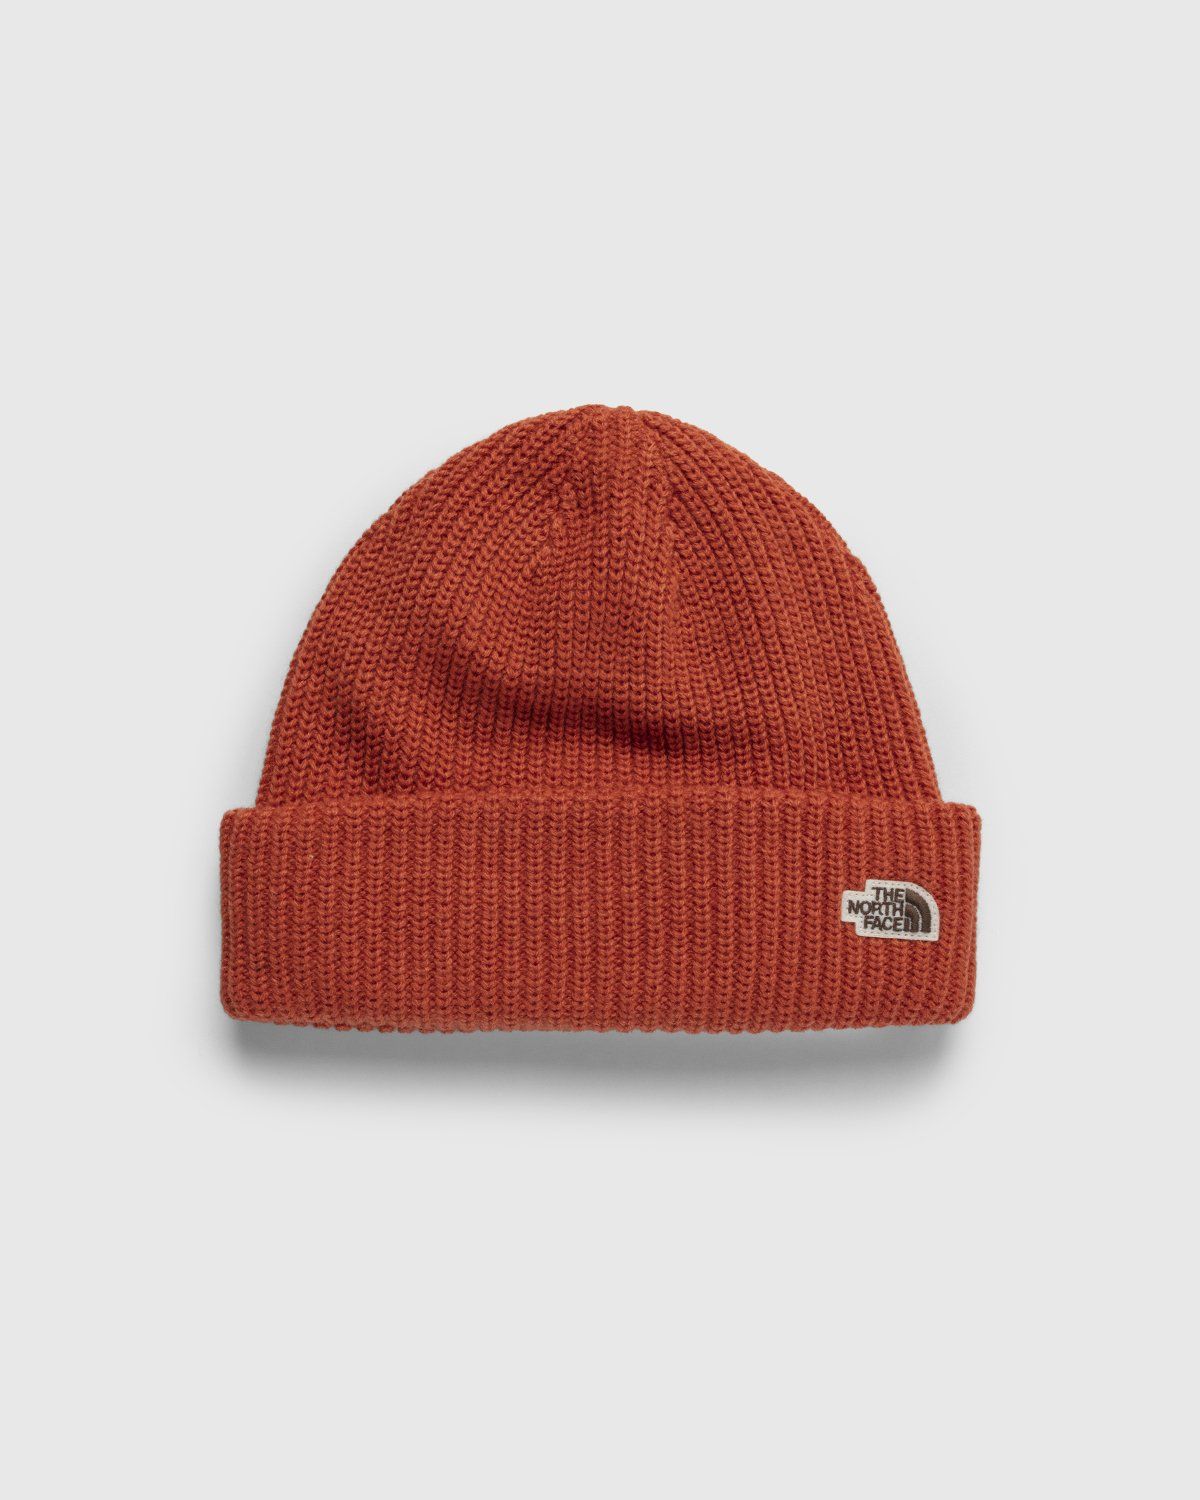 The North Face – Salty Dog Beanie Burntochre Moonlight Ivory - Beanies - Orange - Image 1